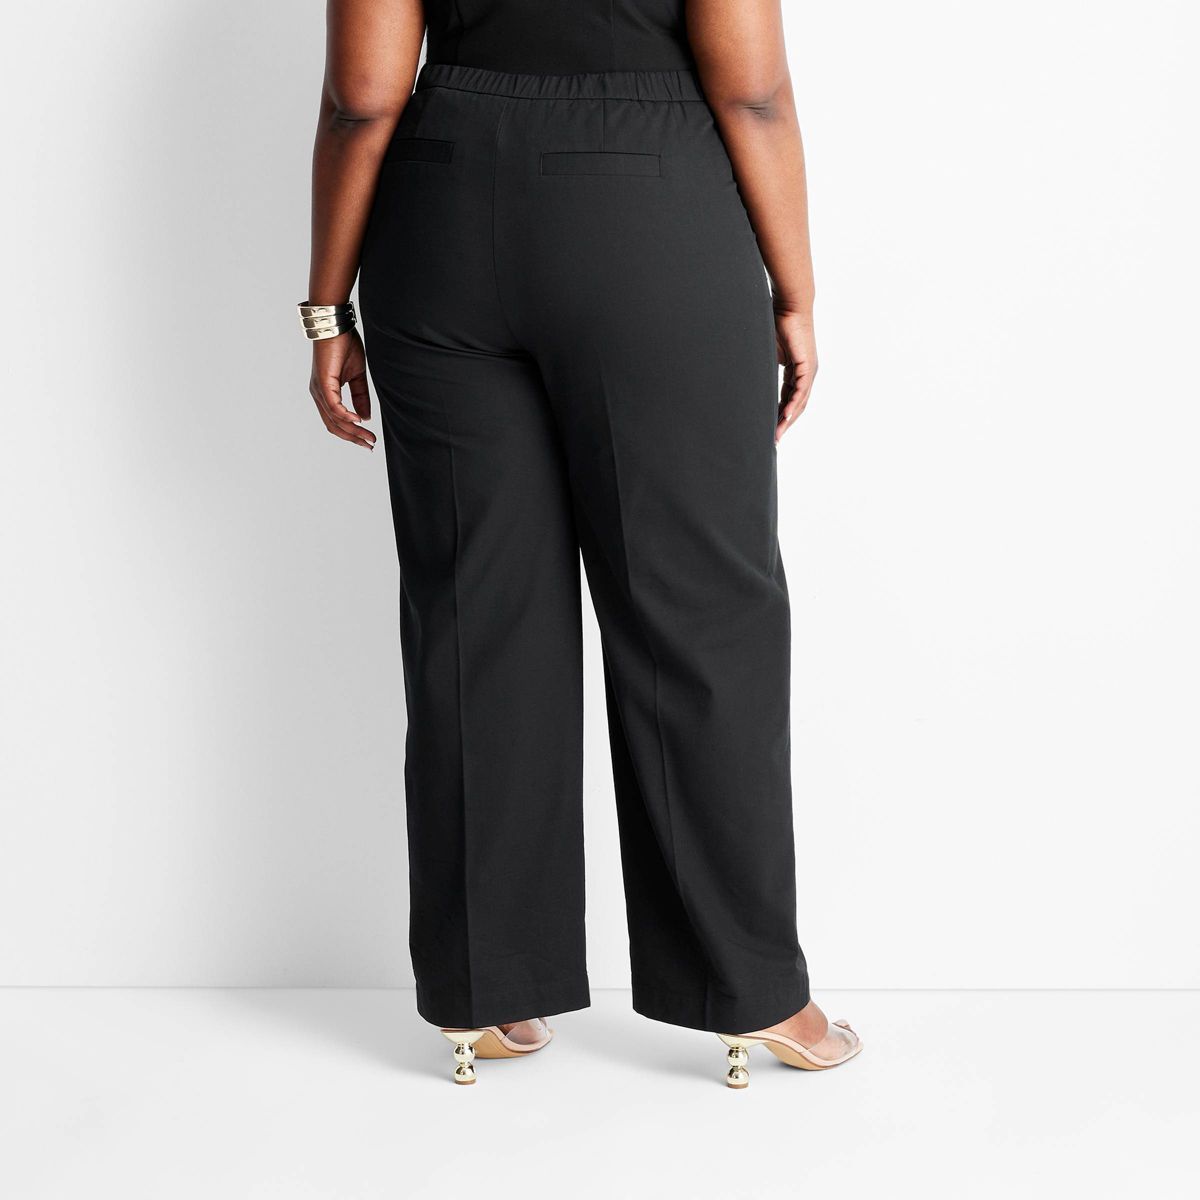 Women's High-Rise Straight Leg Pants - Future Collective™ with Jenee Naylor | Target